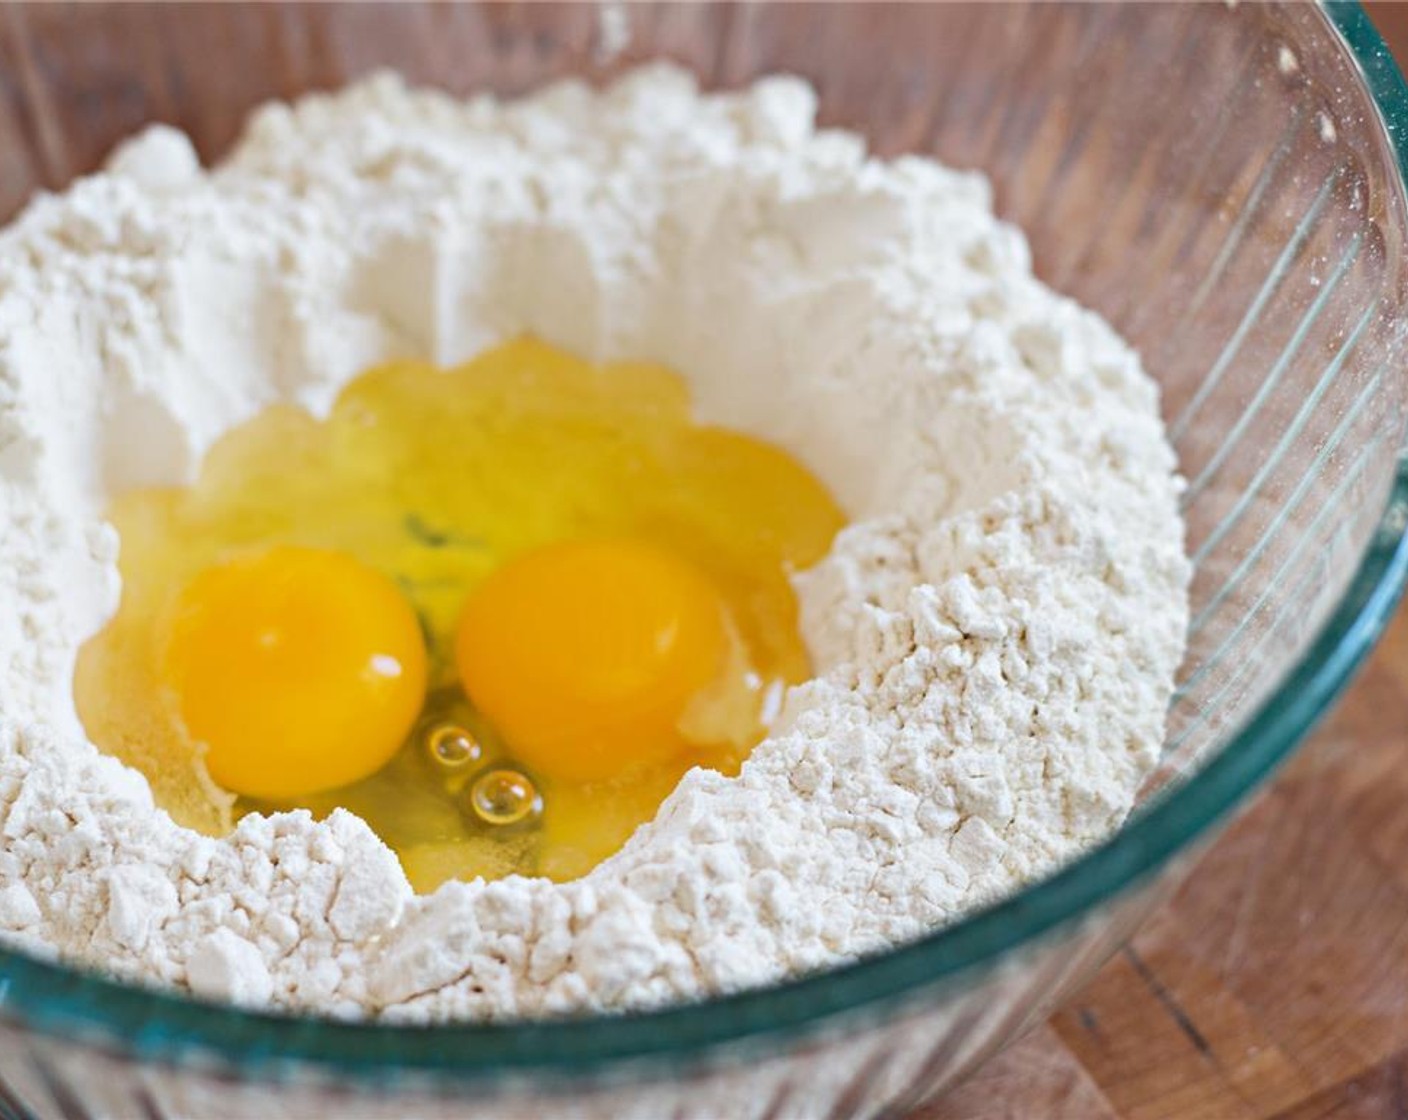 step 1 Put the All-Purpose Flour (3/4 cup) in a bowl. Make a crater in the center of the flour and crack the Egg (1) into it.